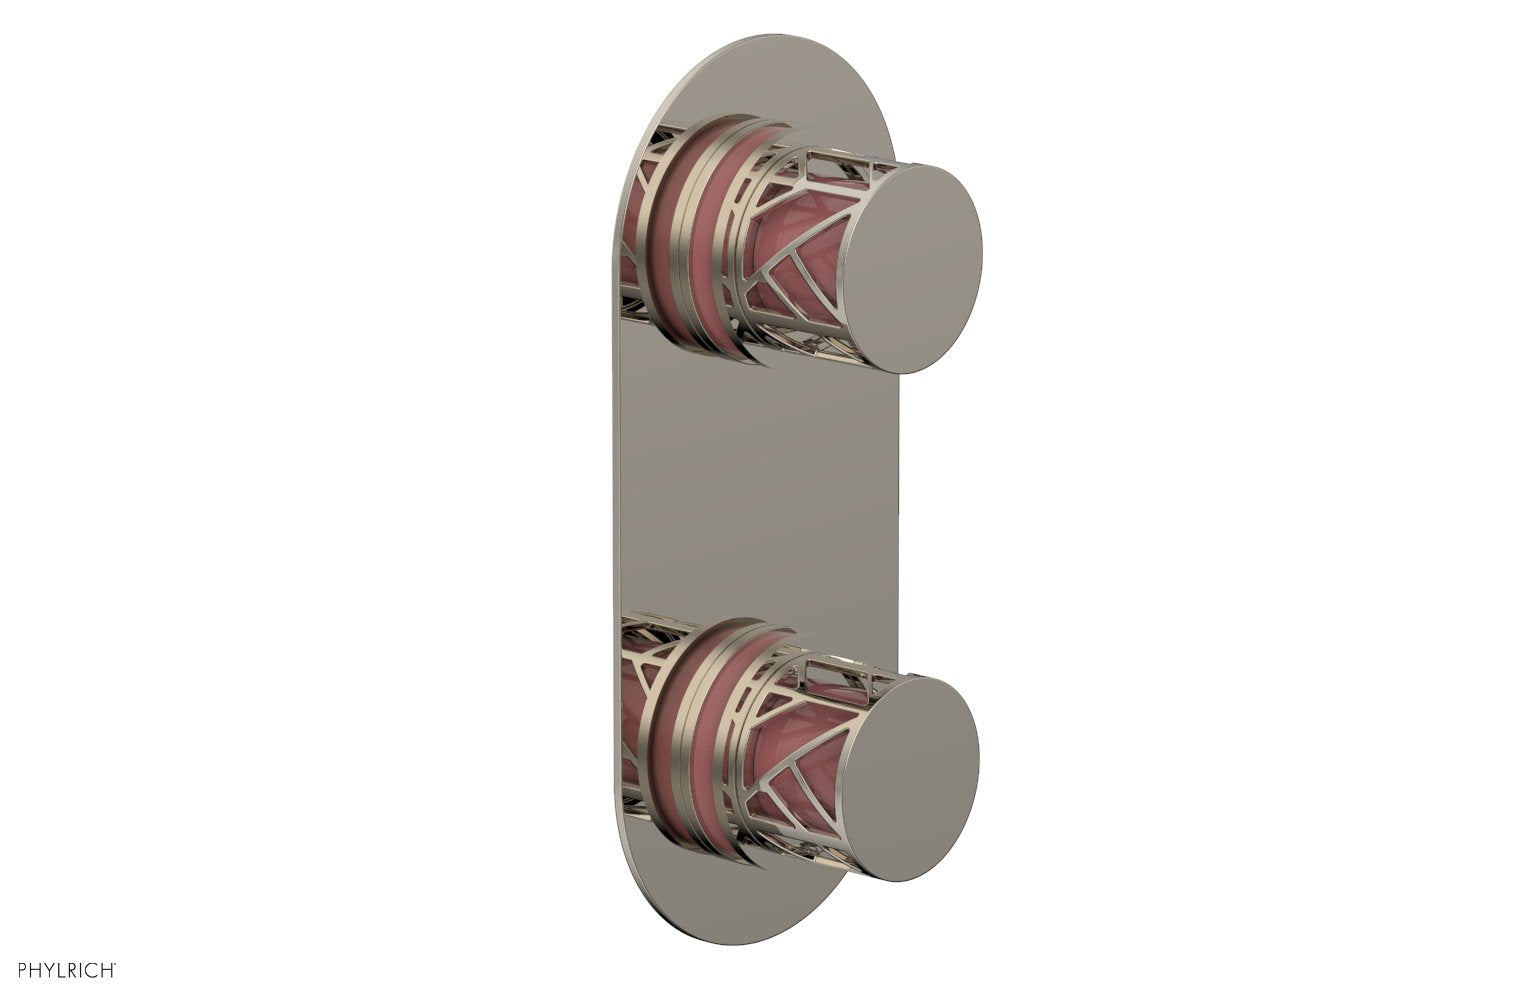 Phylrich JOLIE Thermostatic Valve with Volume Control or Diverter with "Pink" Accents